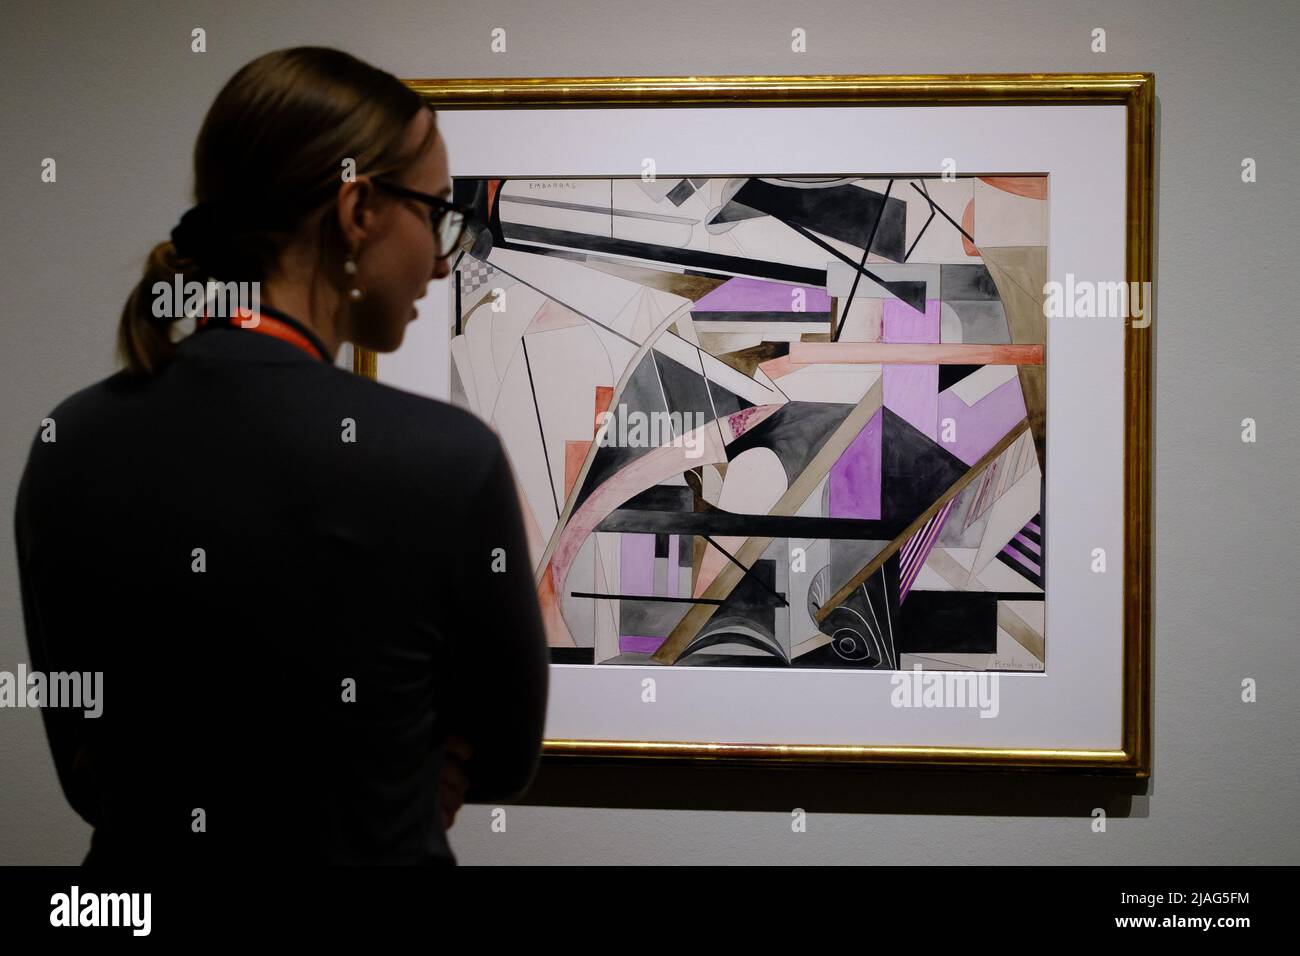 A woman looks at the painting Francis Picabia during the exhibition 'Artist Letters in the Anne-Marie Springer Collection' at the Museo Nacional Thyssen-Bornemisza in Madrid. The Thyssen-Bornemisza National Museum presents, for the first time in Spain, a selection of letters and postcards written by painters such as Delacroix, Manet, Degas, Monet, Cézanne, Van Gogh, Gauguin, Matisse, Juan Gris, Frida Kahlo or Lucian Freud, belonging to the Anne-Marie Springer collection, in dialogue with works by these and other artists in the permanent collection. Stock Photo